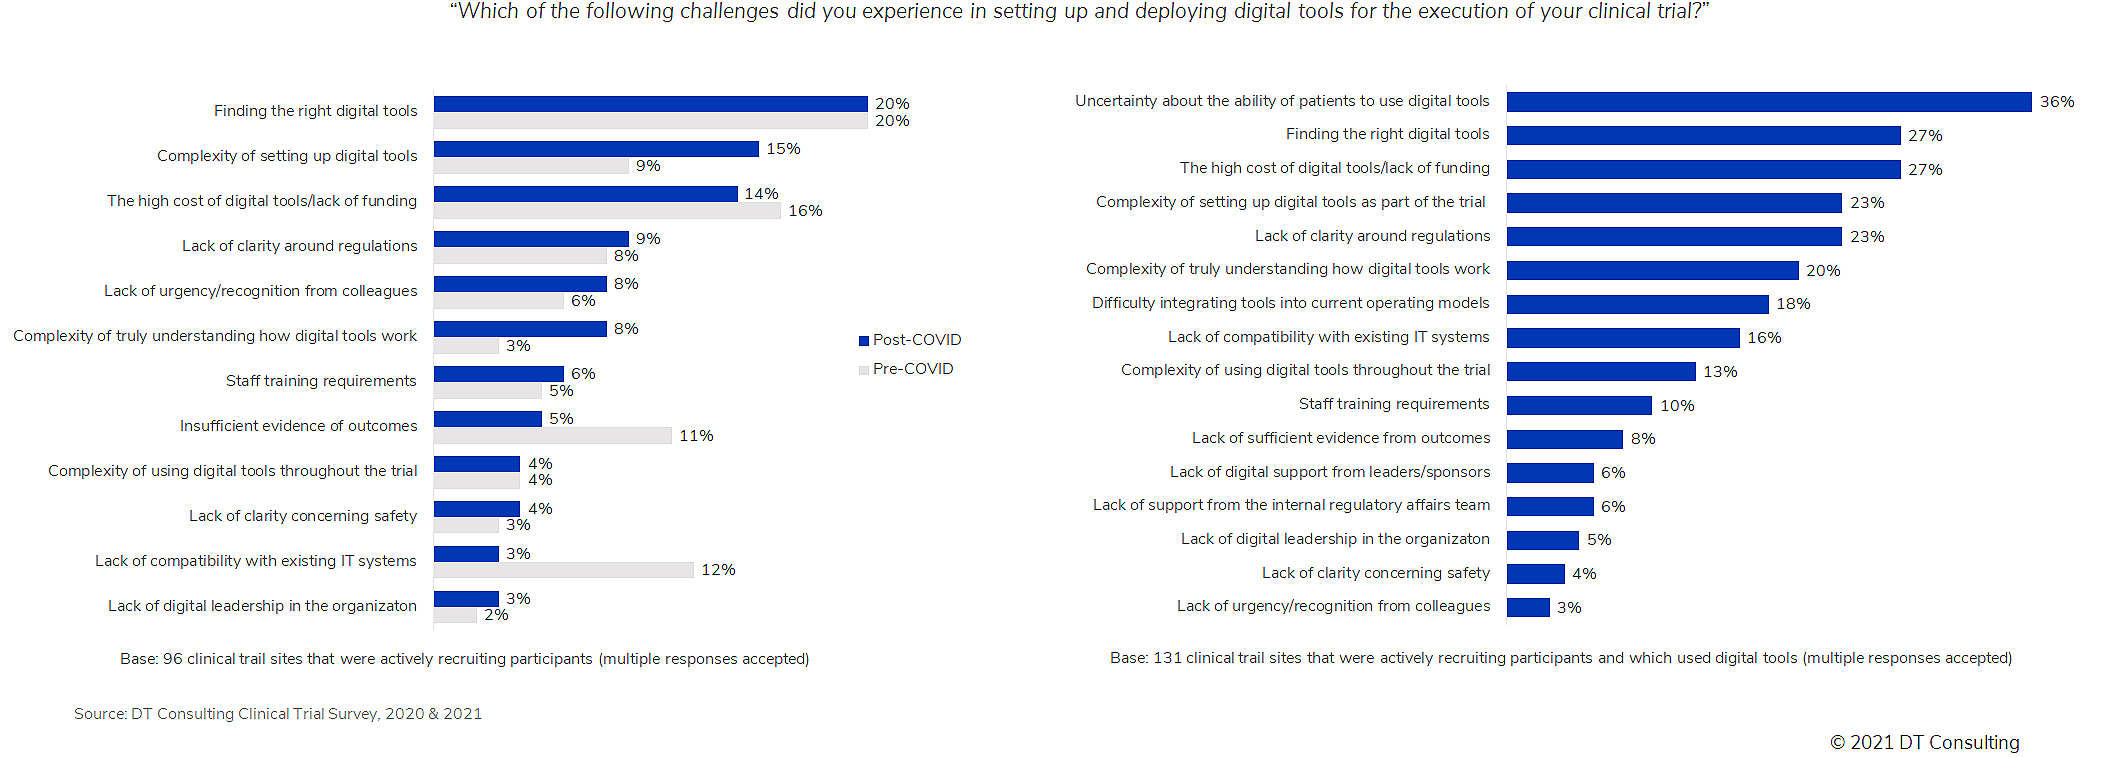 Concern about patients’ ability to use digital tools emerged as the top challenge to digital technology adoption in the 2021 survey